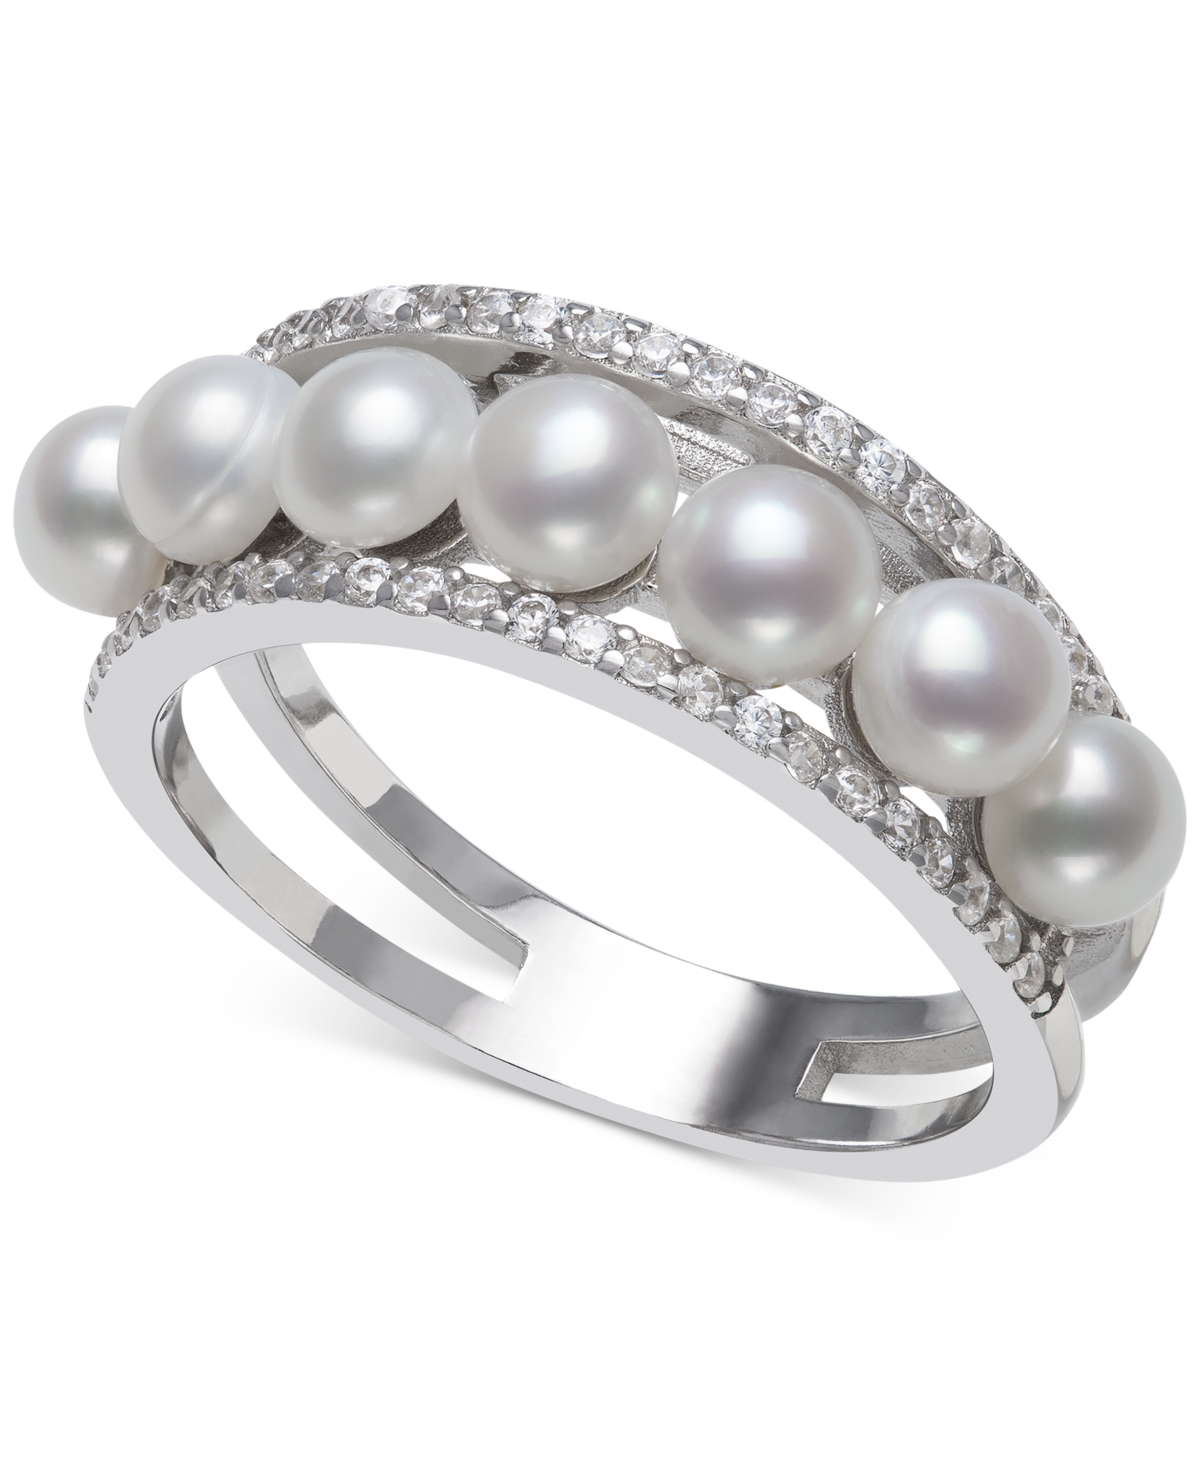 Cultured Freshwater Button Pearl (4mm) & Cubic Zirconia Ring in Sterling Silver, Created for Macy's - Sterling Silver